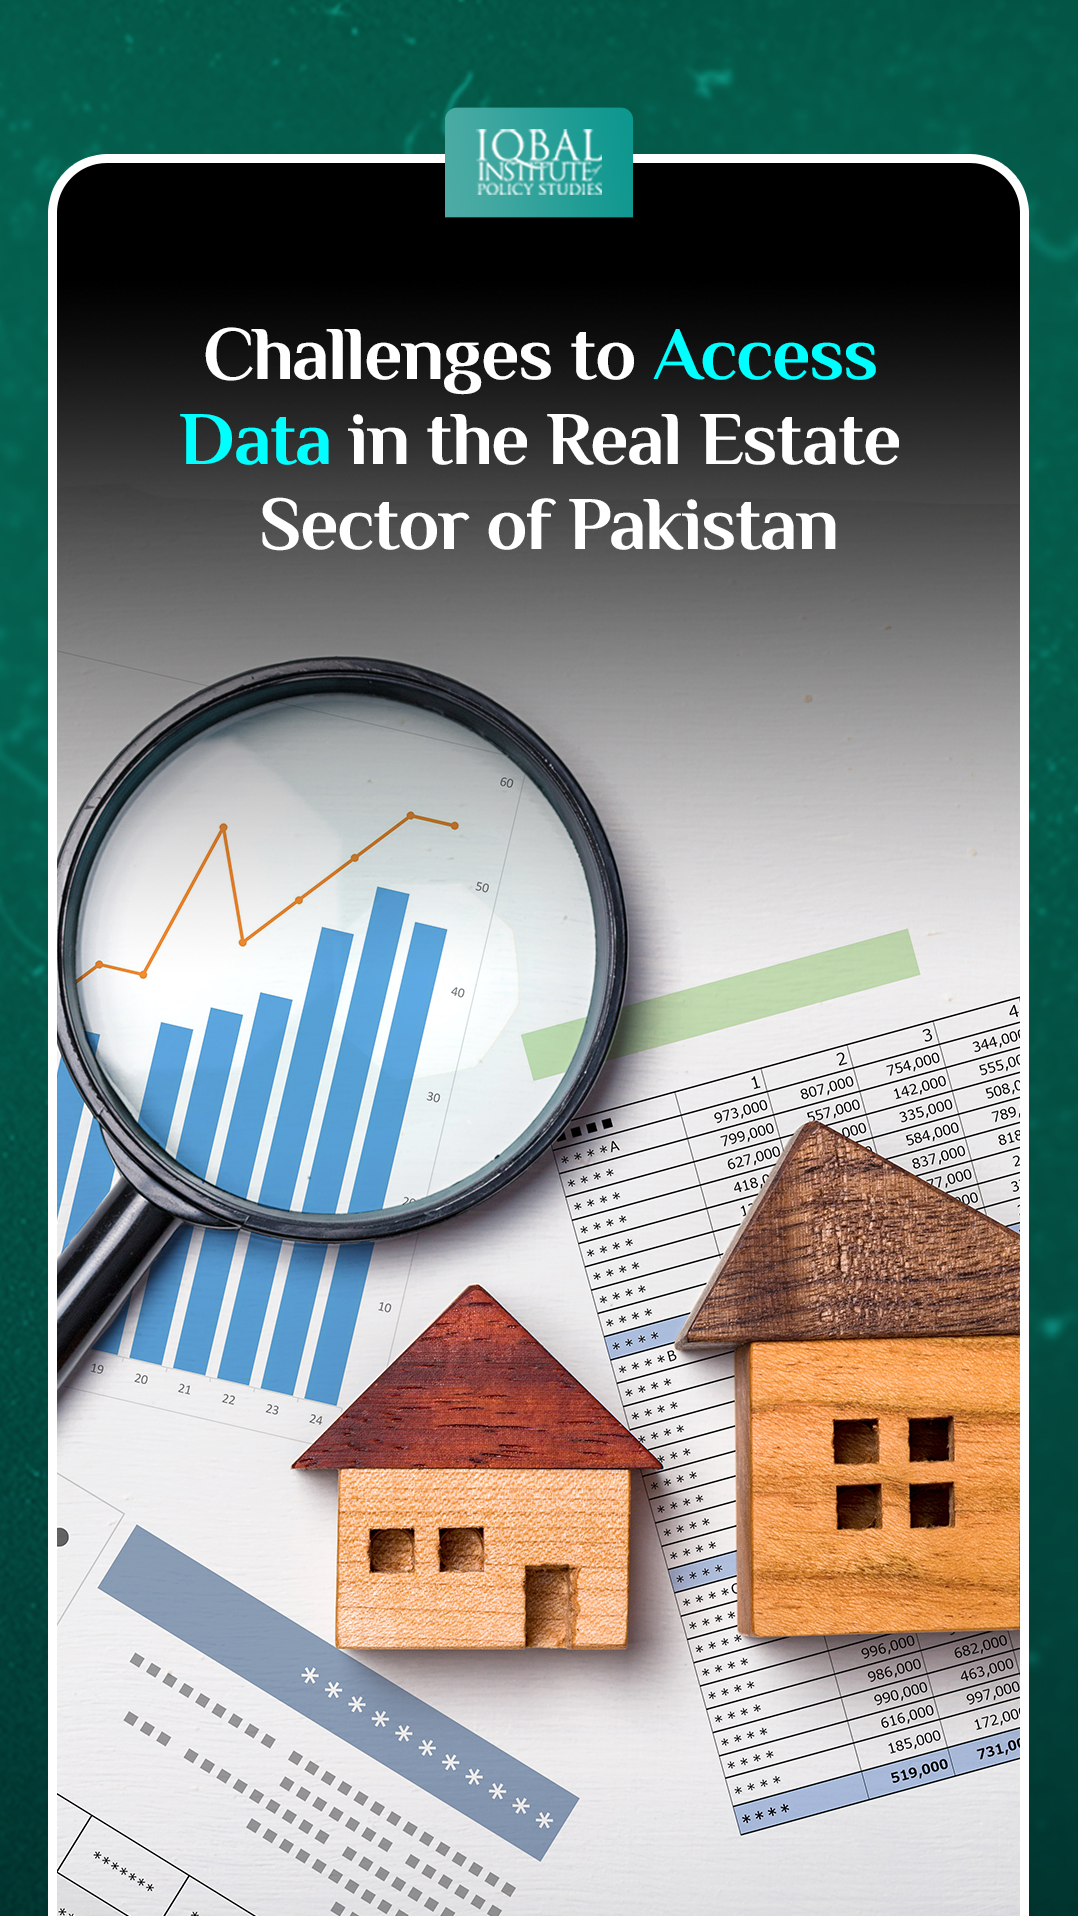 Challenges to the Access of Data in the Real Estate Sector of Pakistan